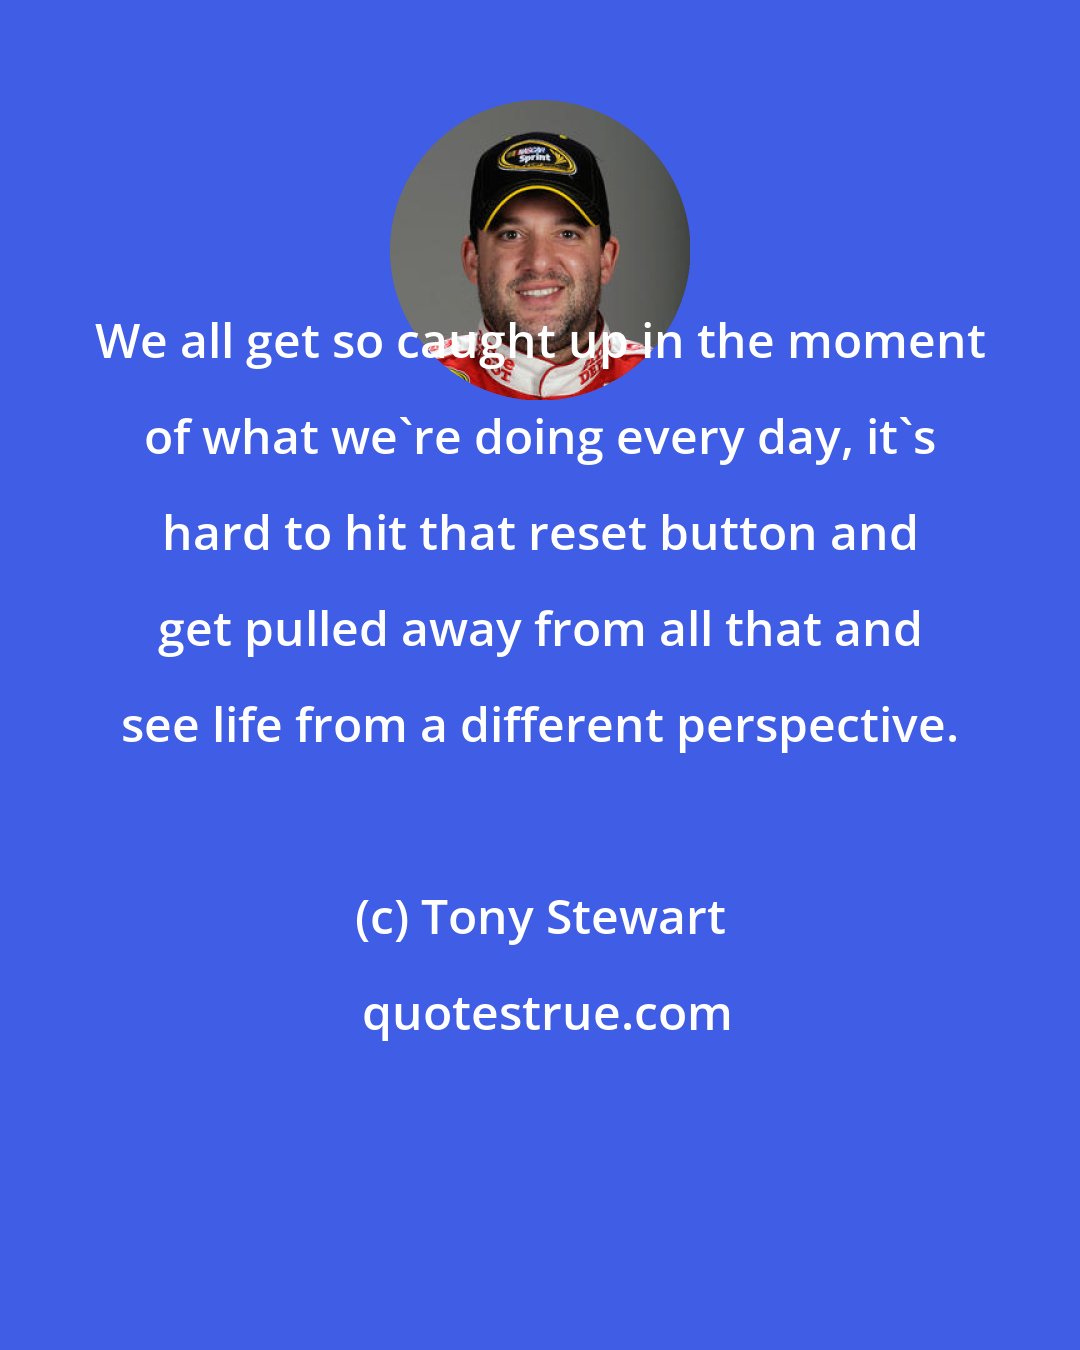 Tony Stewart: We all get so caught up in the moment of what we're doing every day, it's hard to hit that reset button and get pulled away from all that and see life from a different perspective.